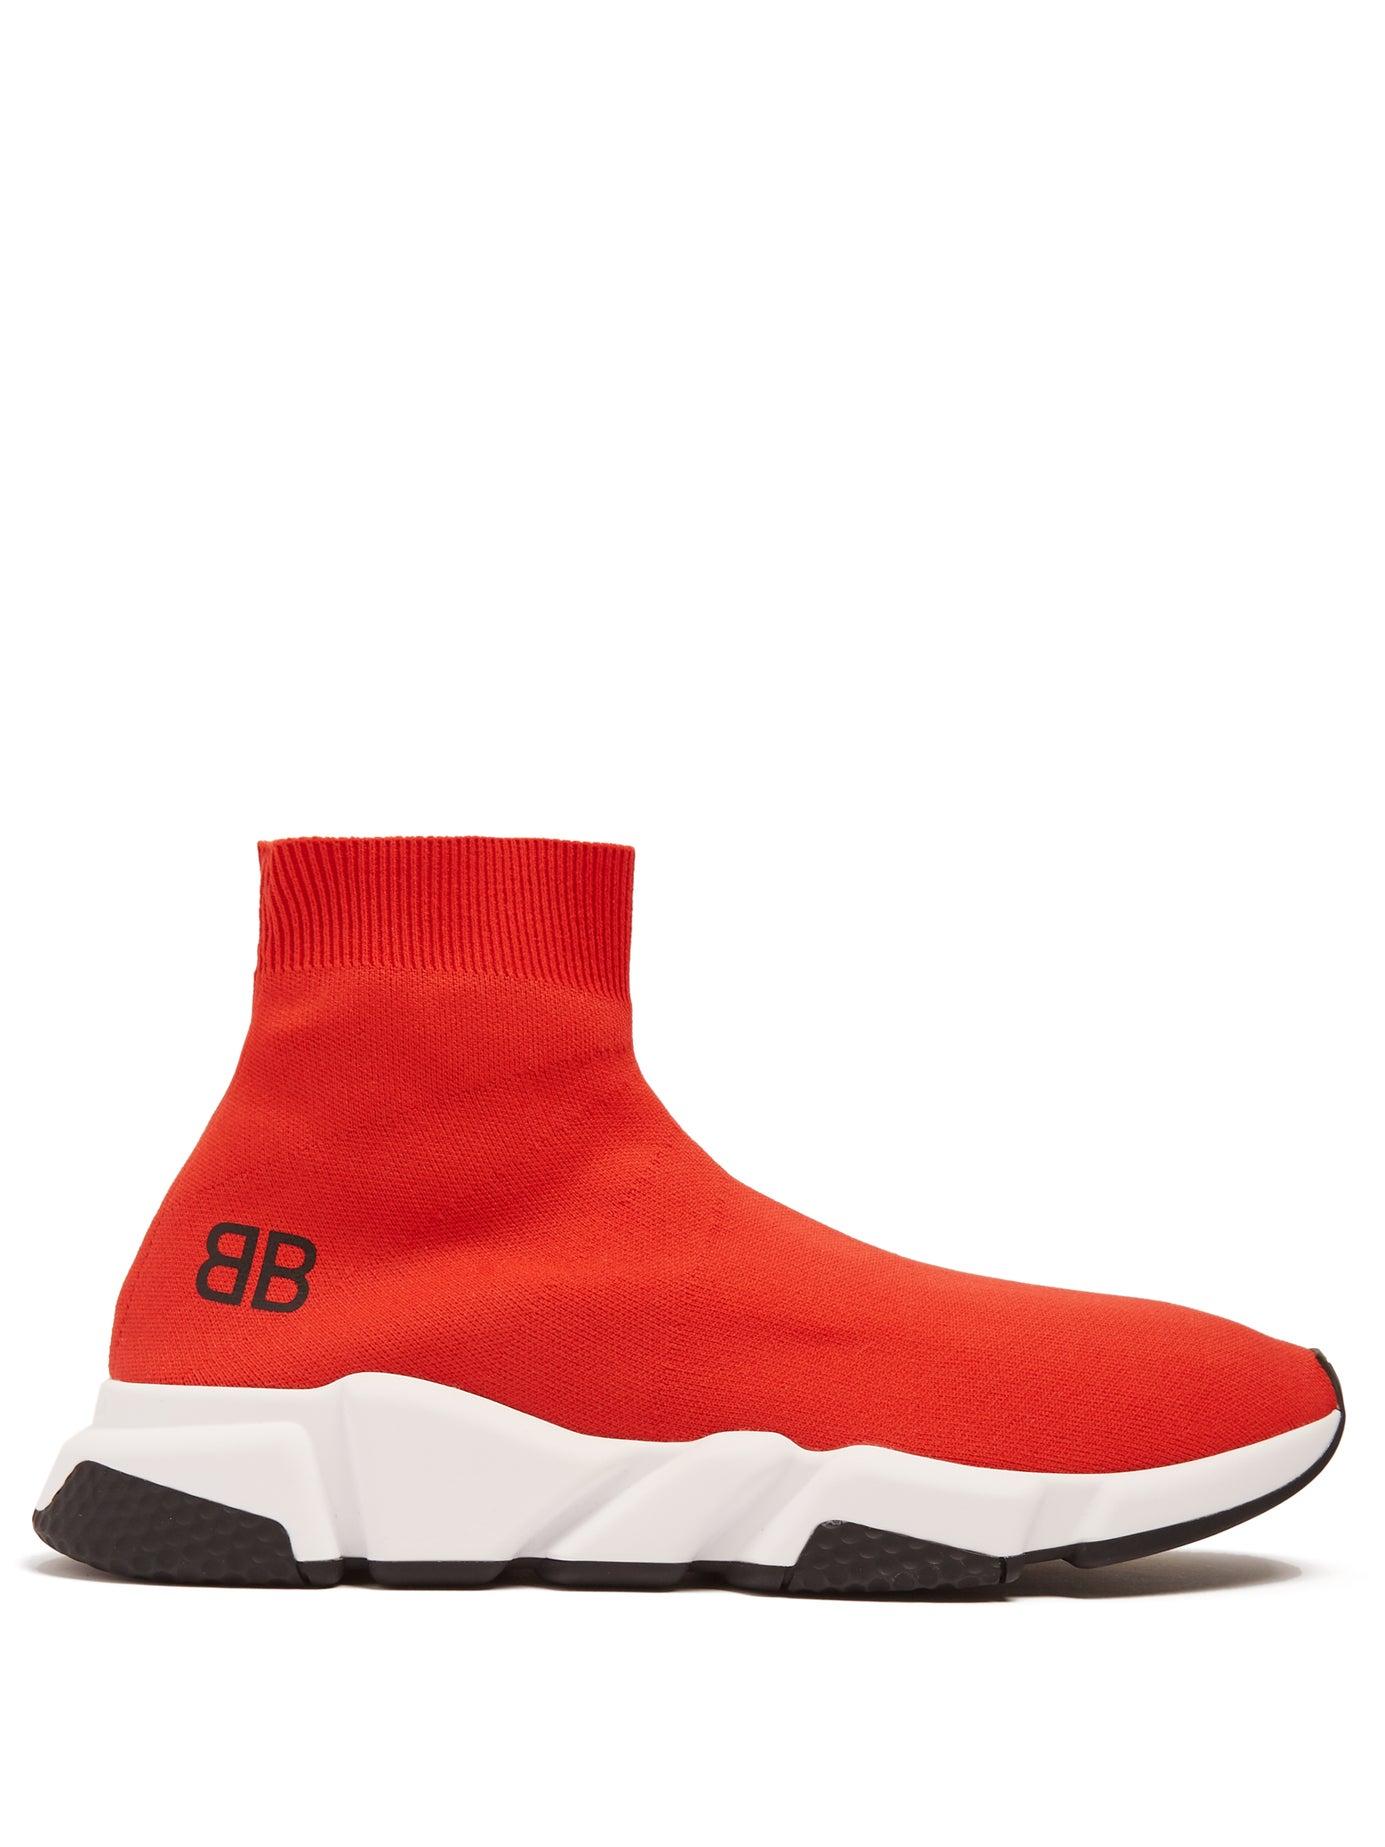 Balenciaga Rubber Speed Sock Trainers in Red White Black (Red) for Men |  Lyst